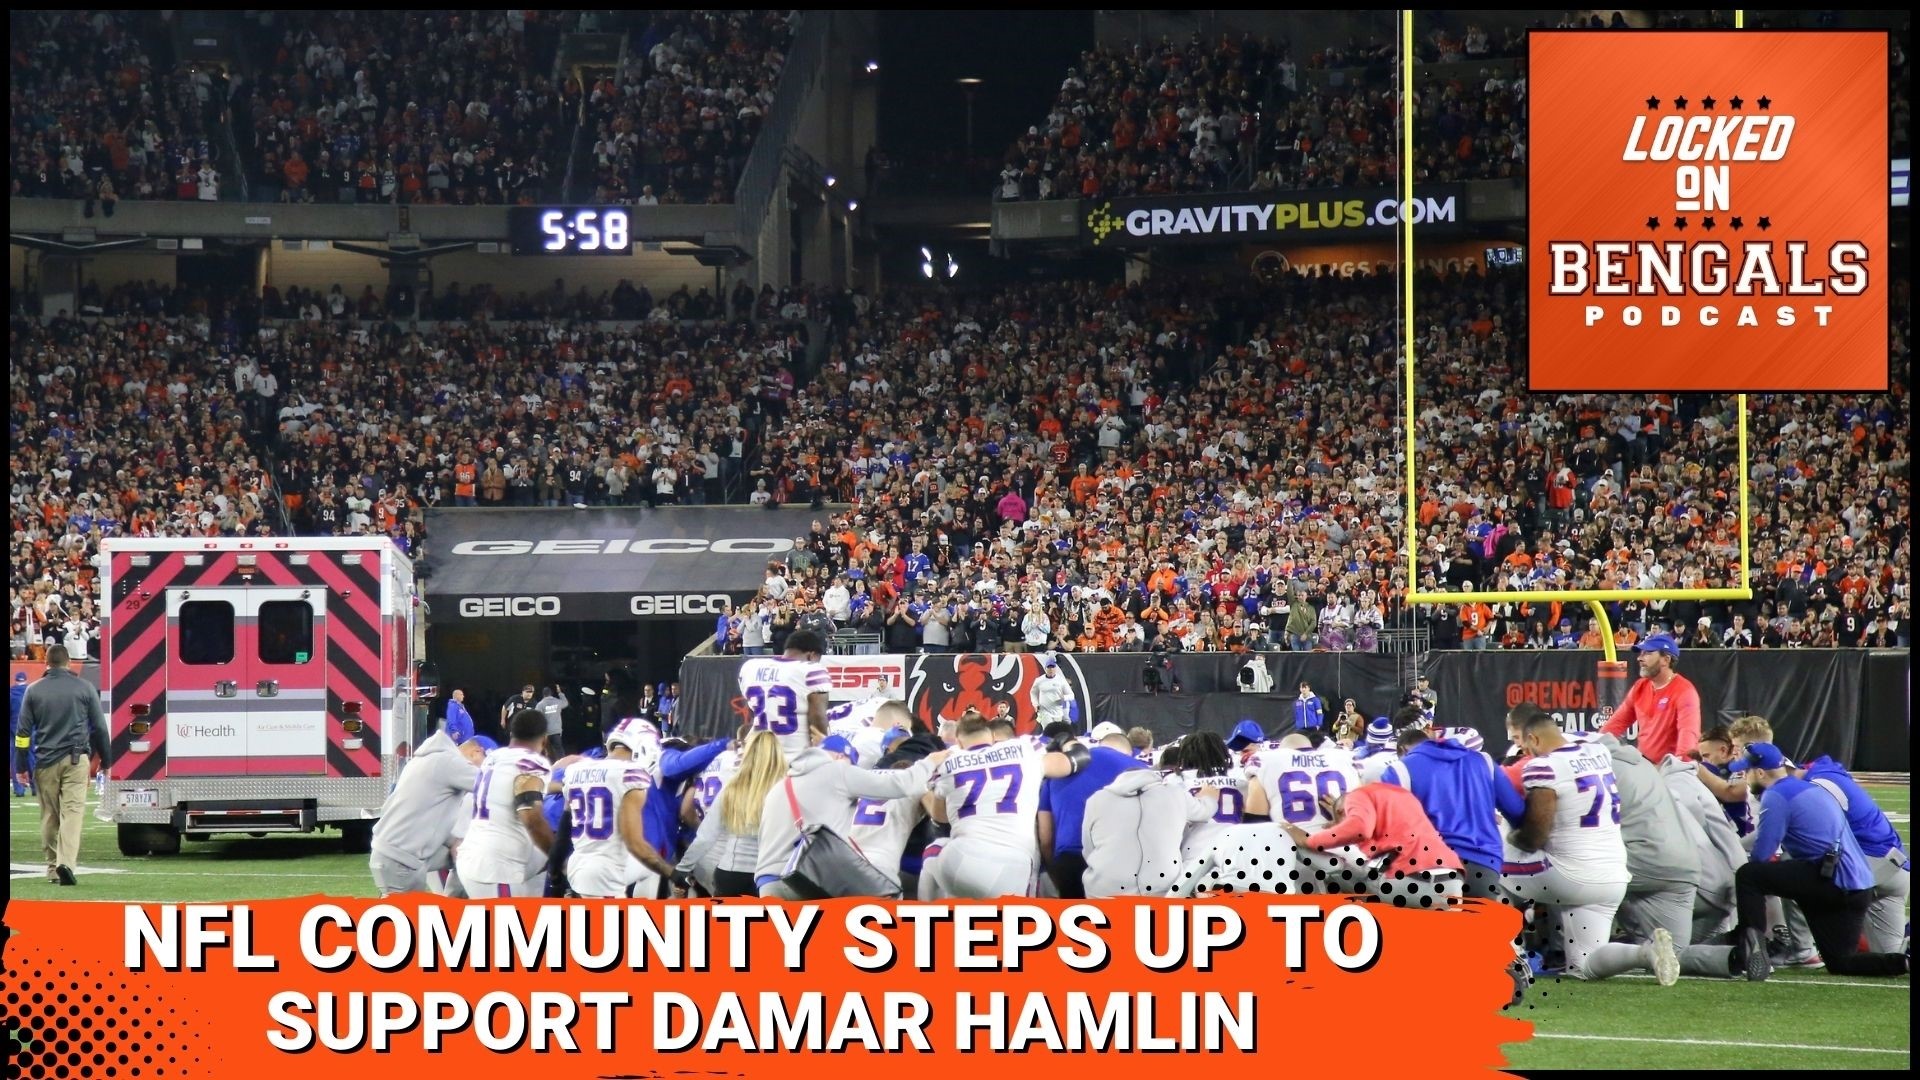 An outpouring of support for Buffalo Bills safety, Damar Hamlin, continued on Tuesday from the Cincinnati Bengals, teams and players around the NFL, media, and fans.